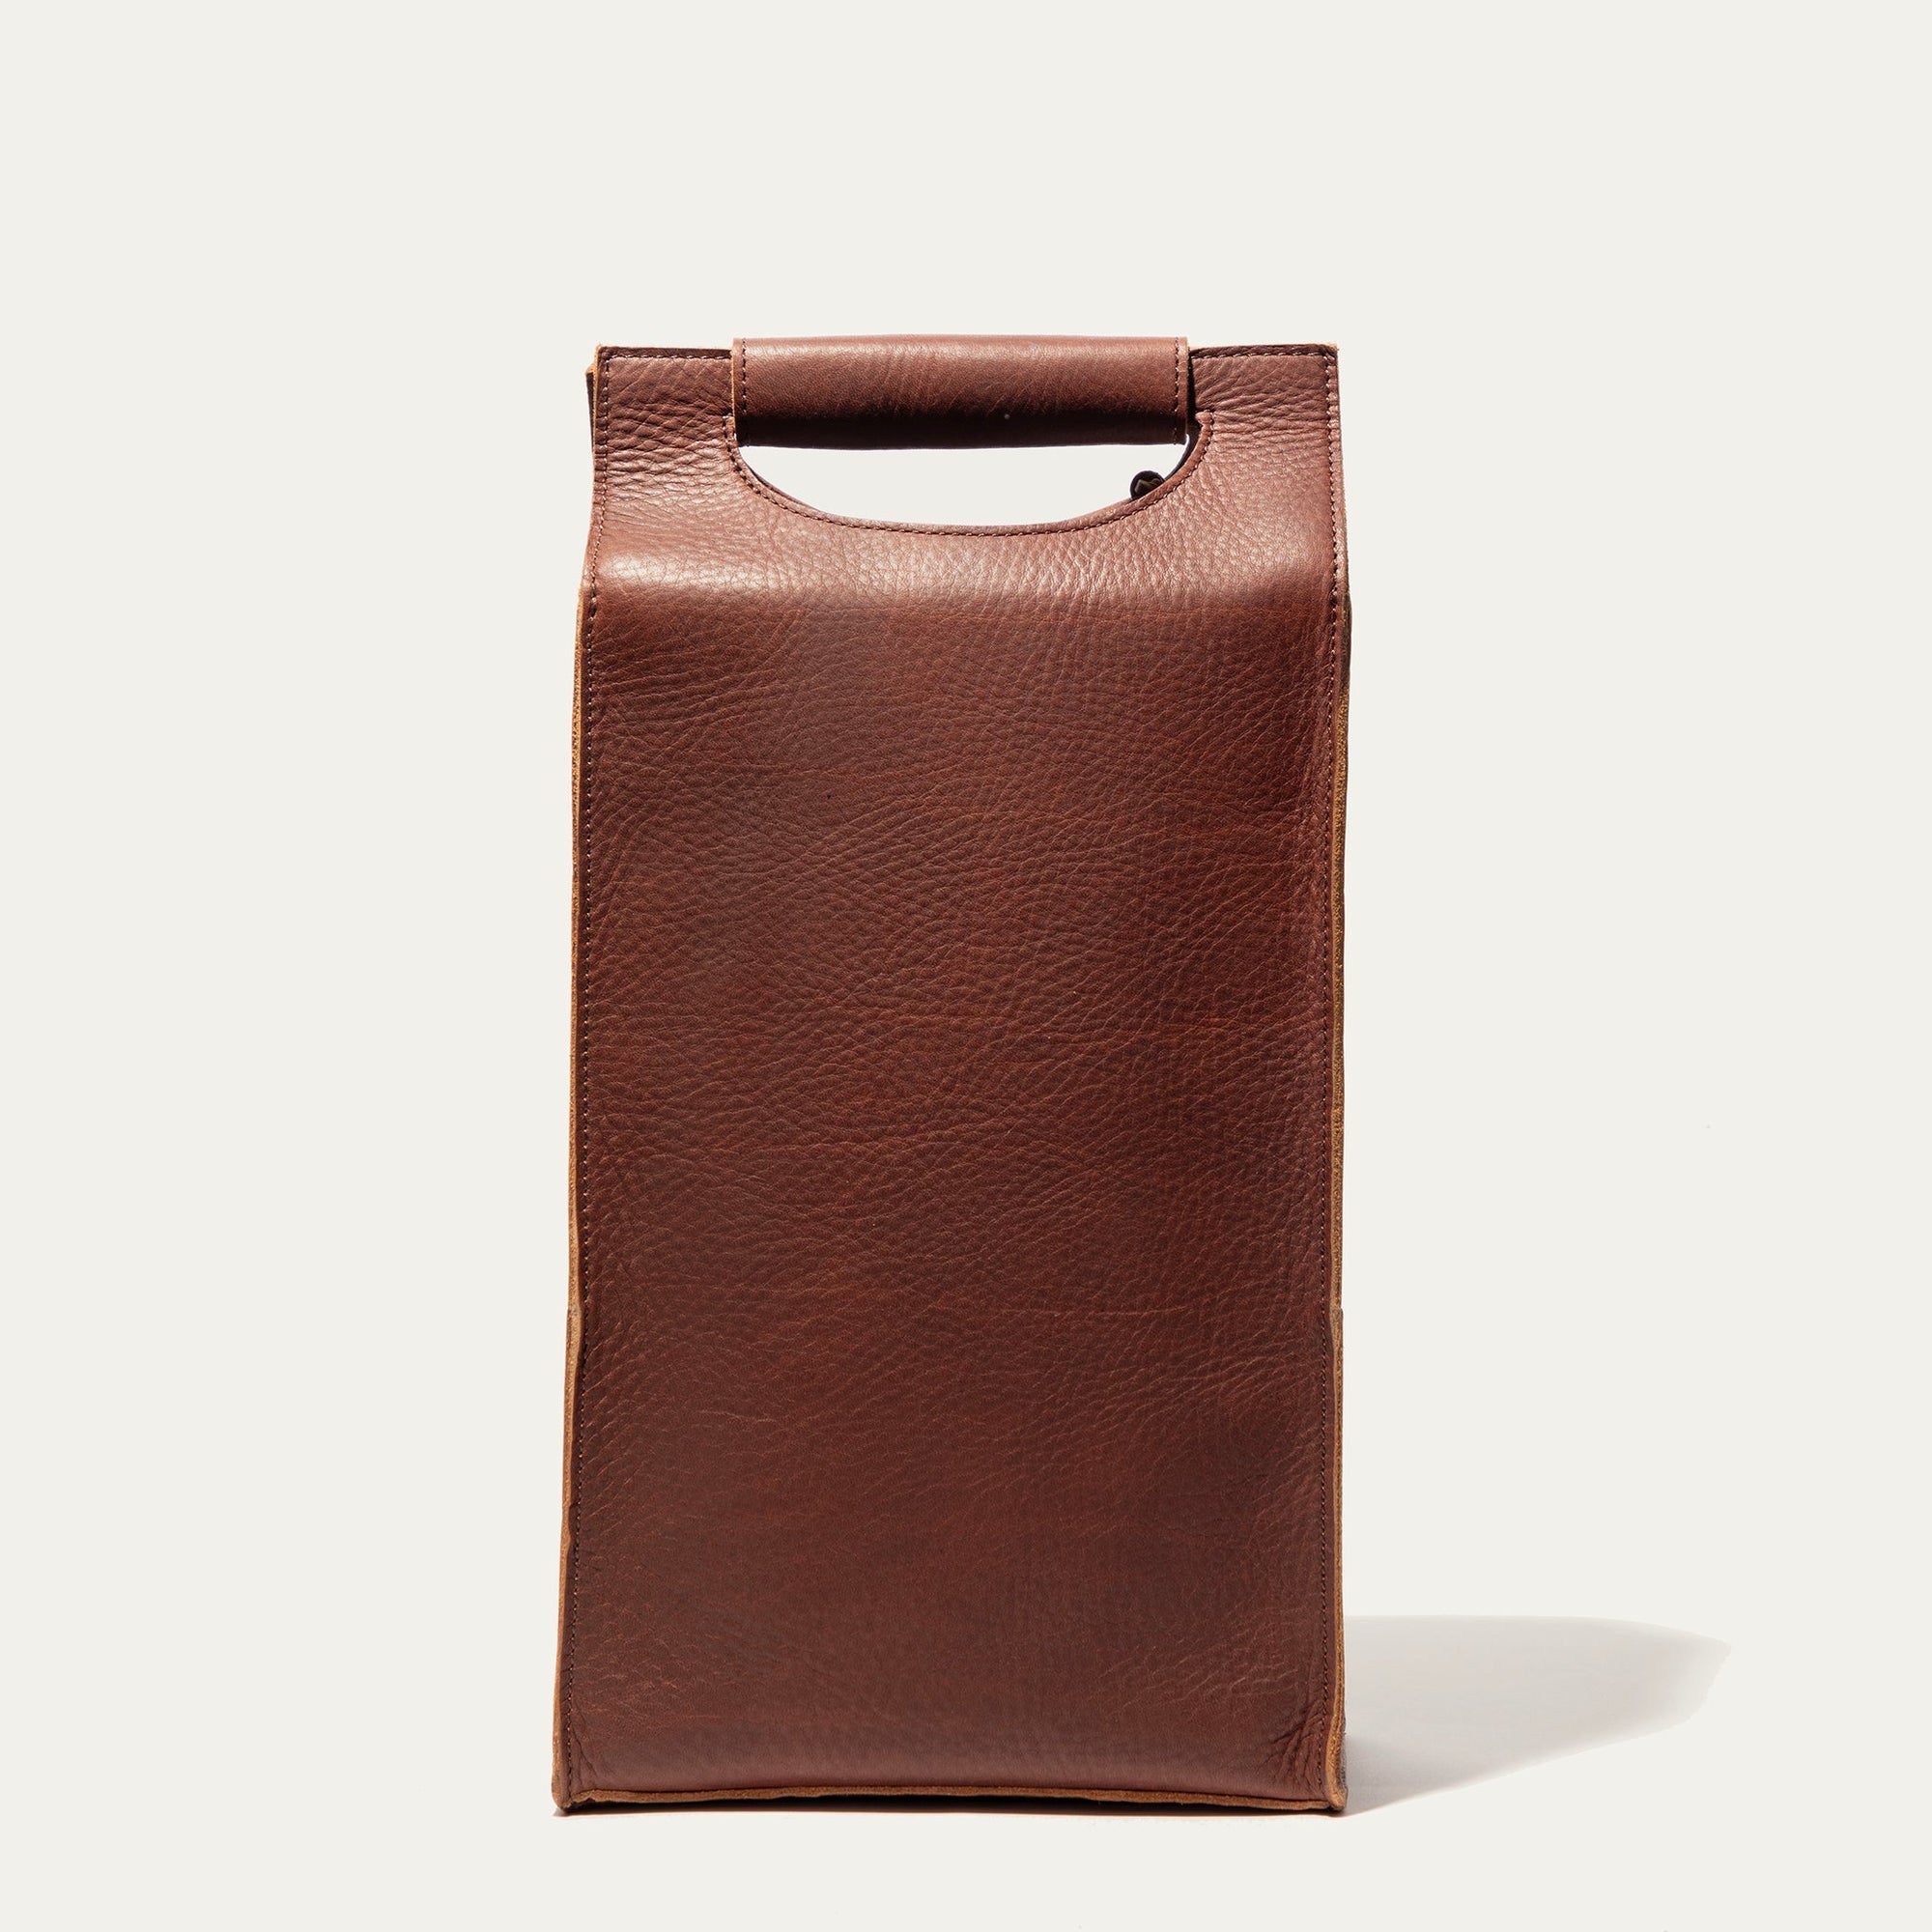 Double Leather Wine Bottle Case in Brown by Will Leather Goods